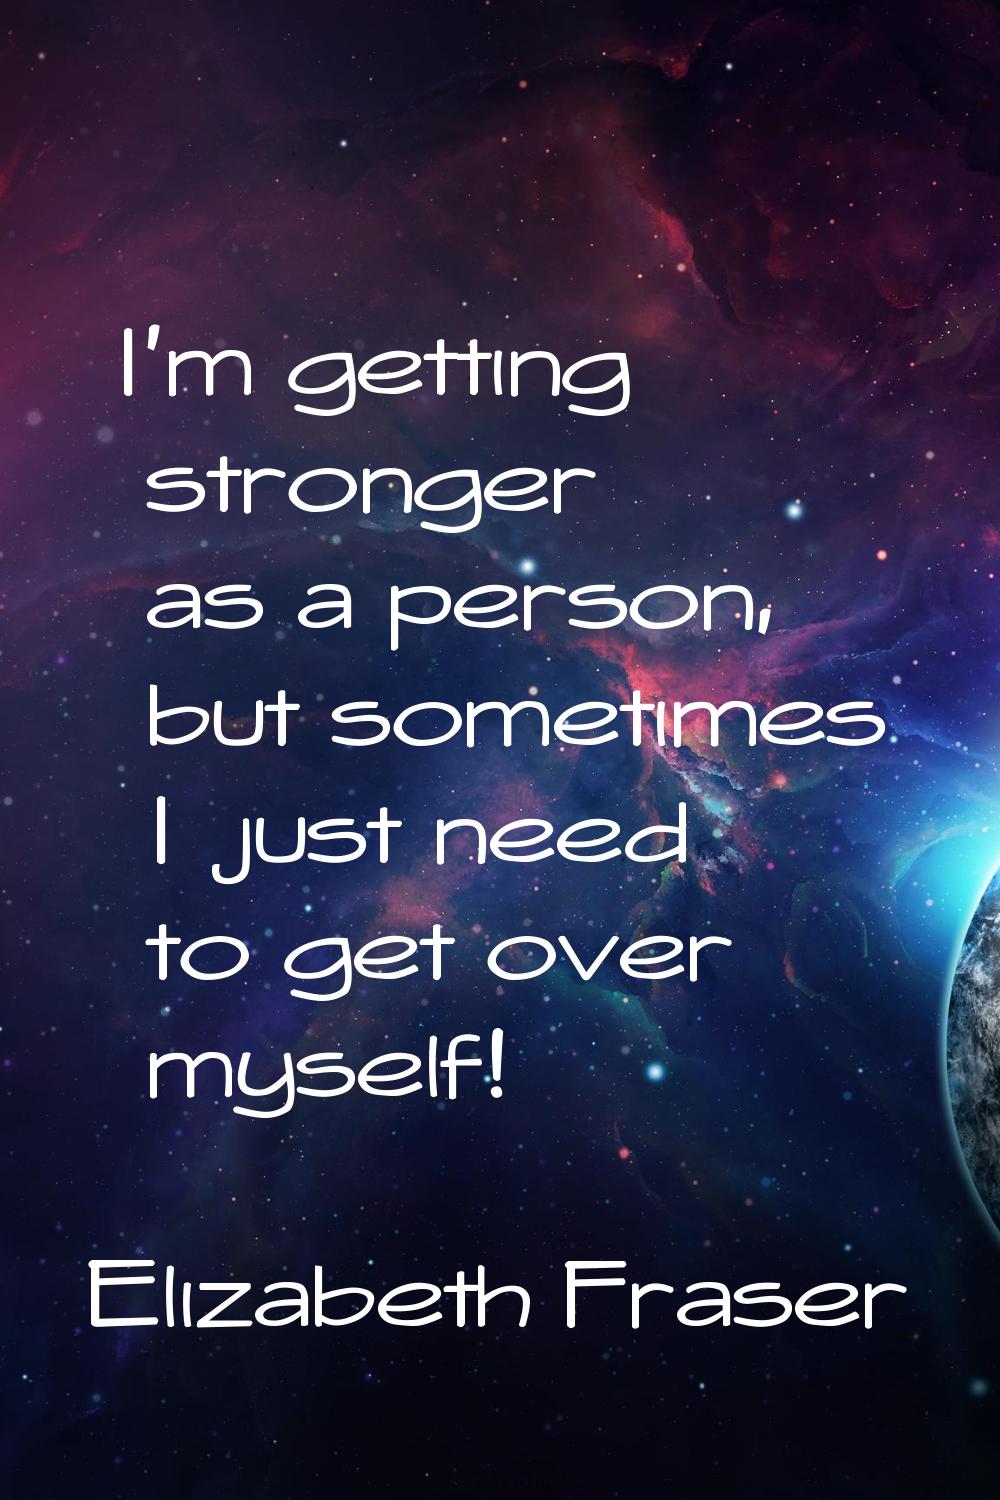 I'm getting stronger as a person, but sometimes I just need to get over myself!